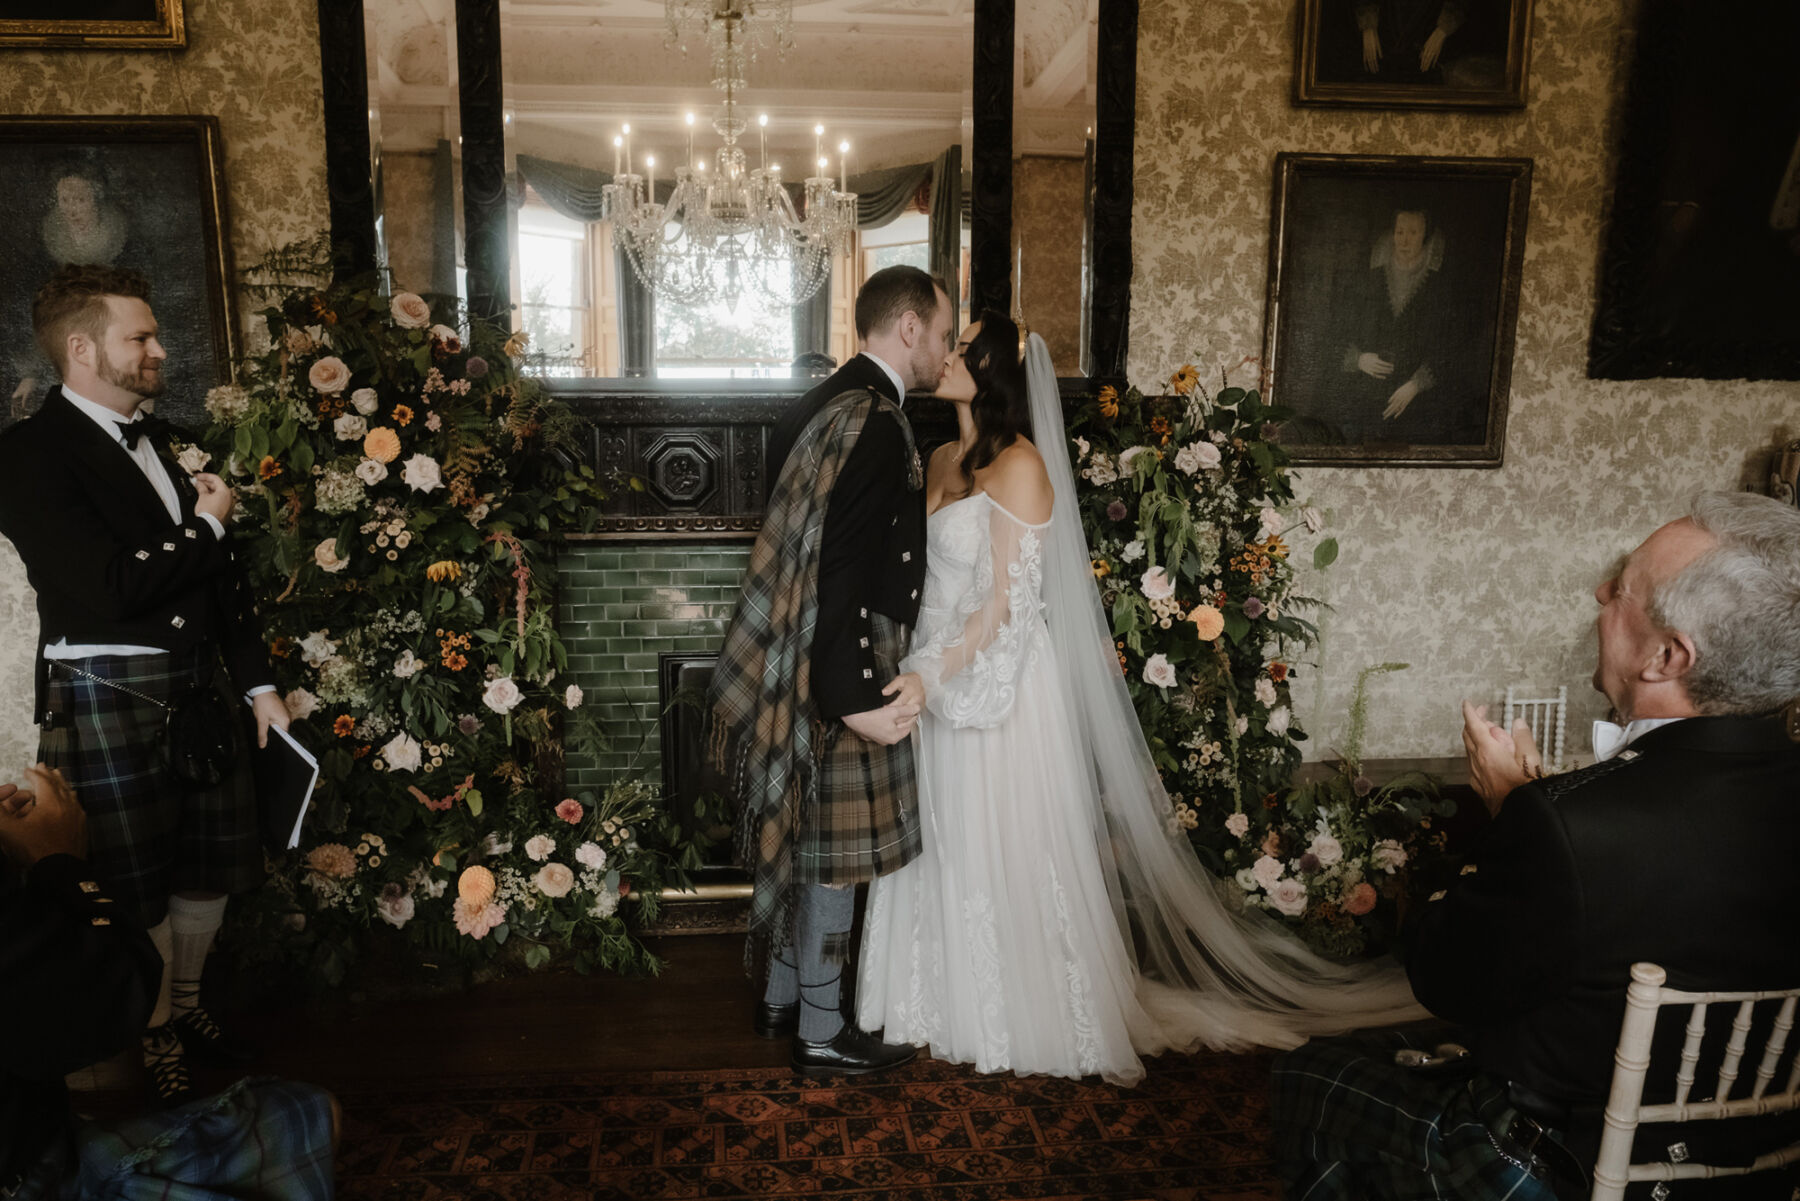 Bride and groom kissing after being pronounced man and wife at their wedding at Cambo Estate in Scotland. The groom wears a tartan fly plaid and kilt. Bride wears a Willowby by Watters wedding dress.